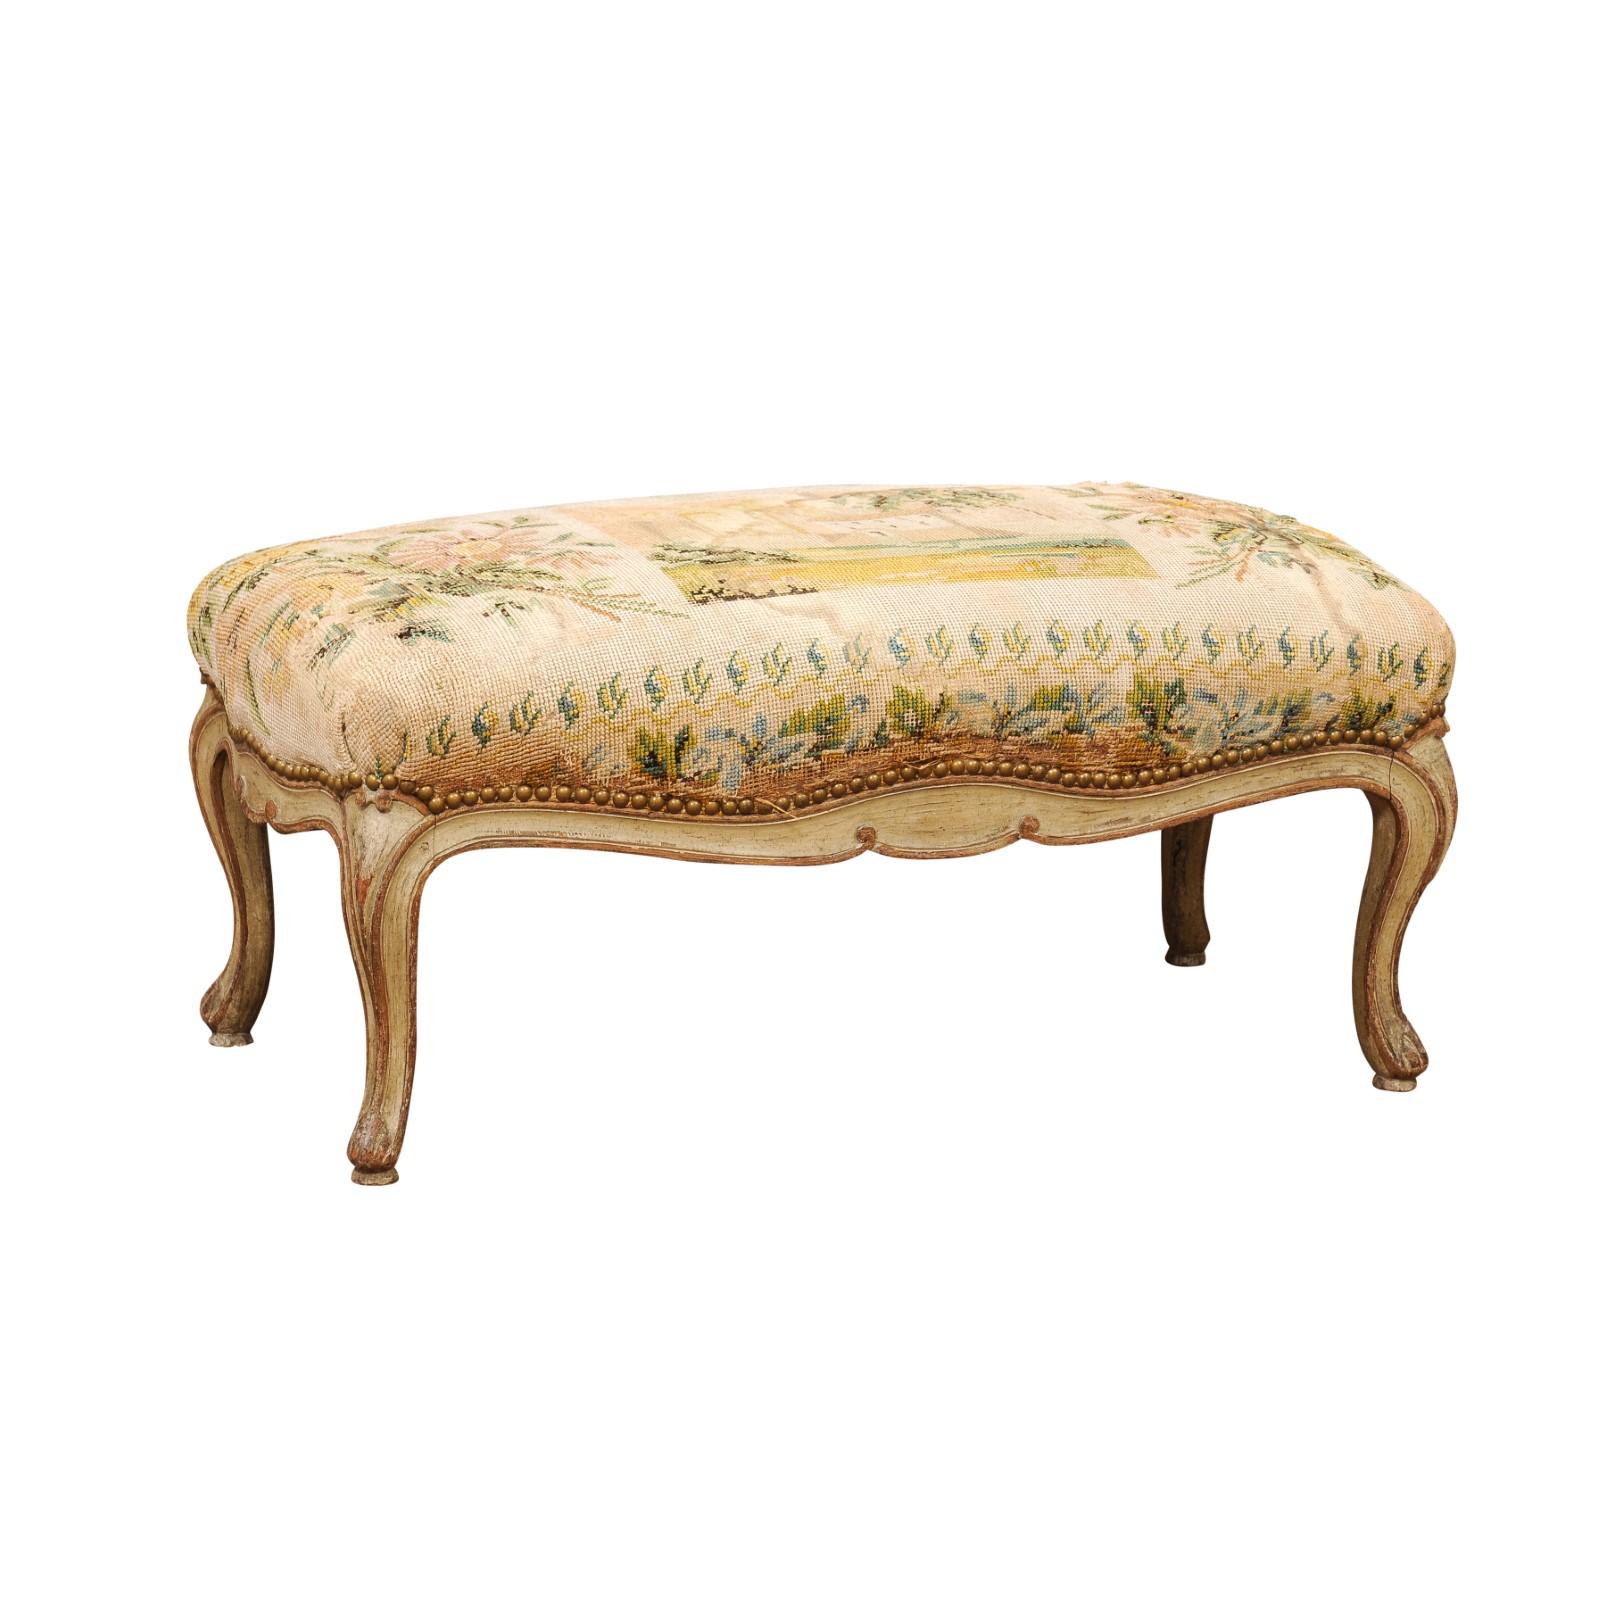 French Louis XV Style Green Painted & Parcel Gilt Bench with Needlework  For Sale 6